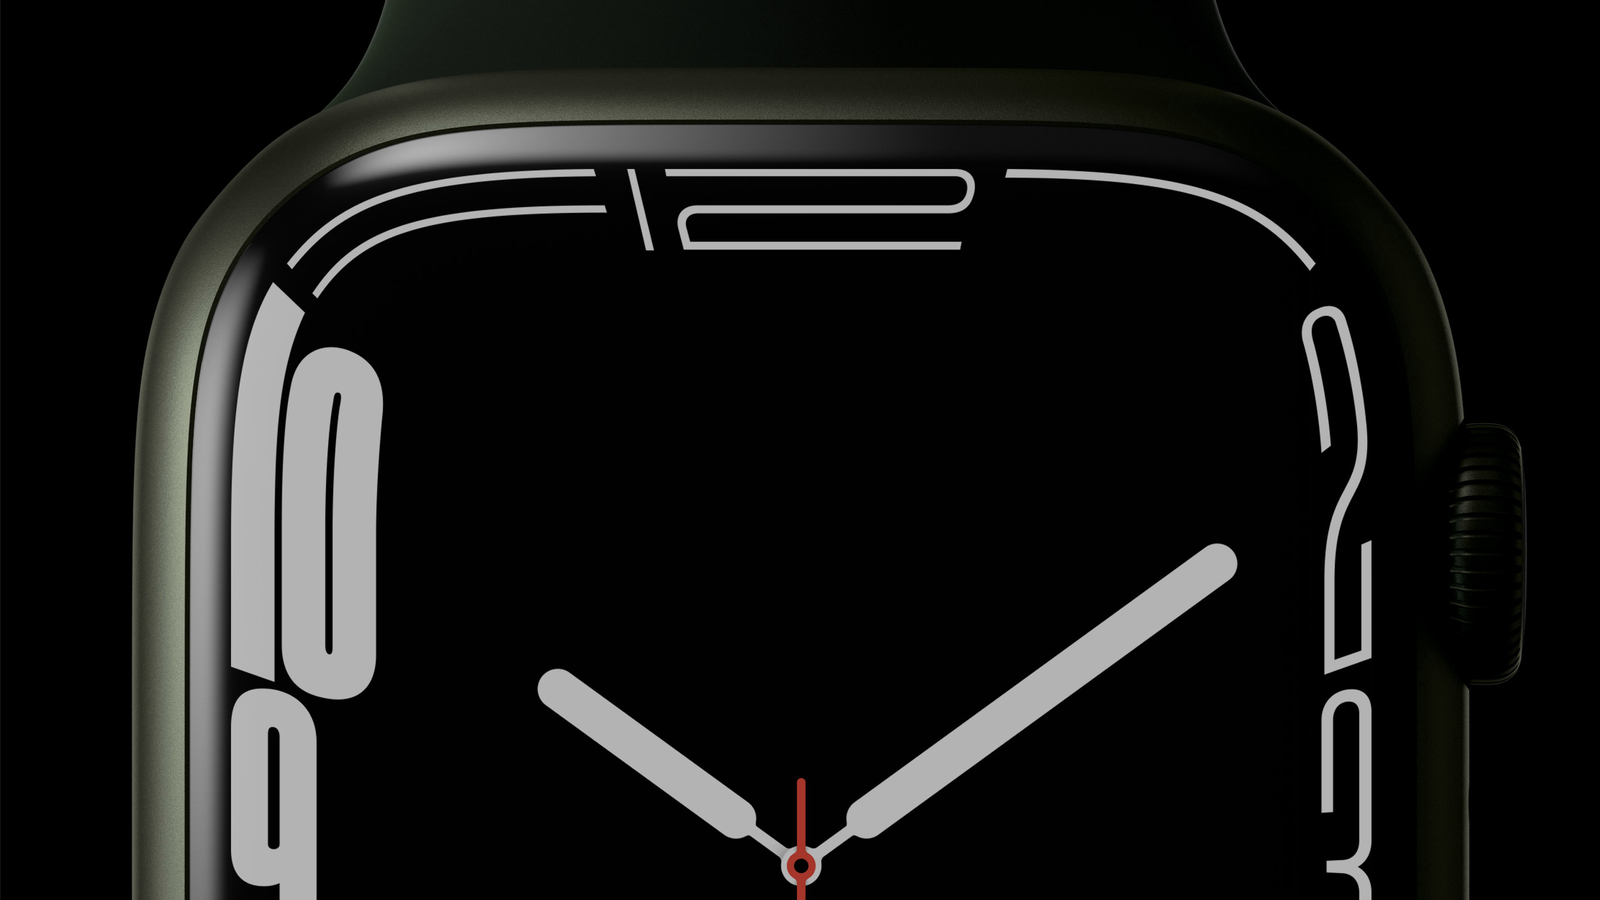 Apple Watch Pro' Rumored to Feature Larger 47mm Case Size With Flat Display  - MacRumors